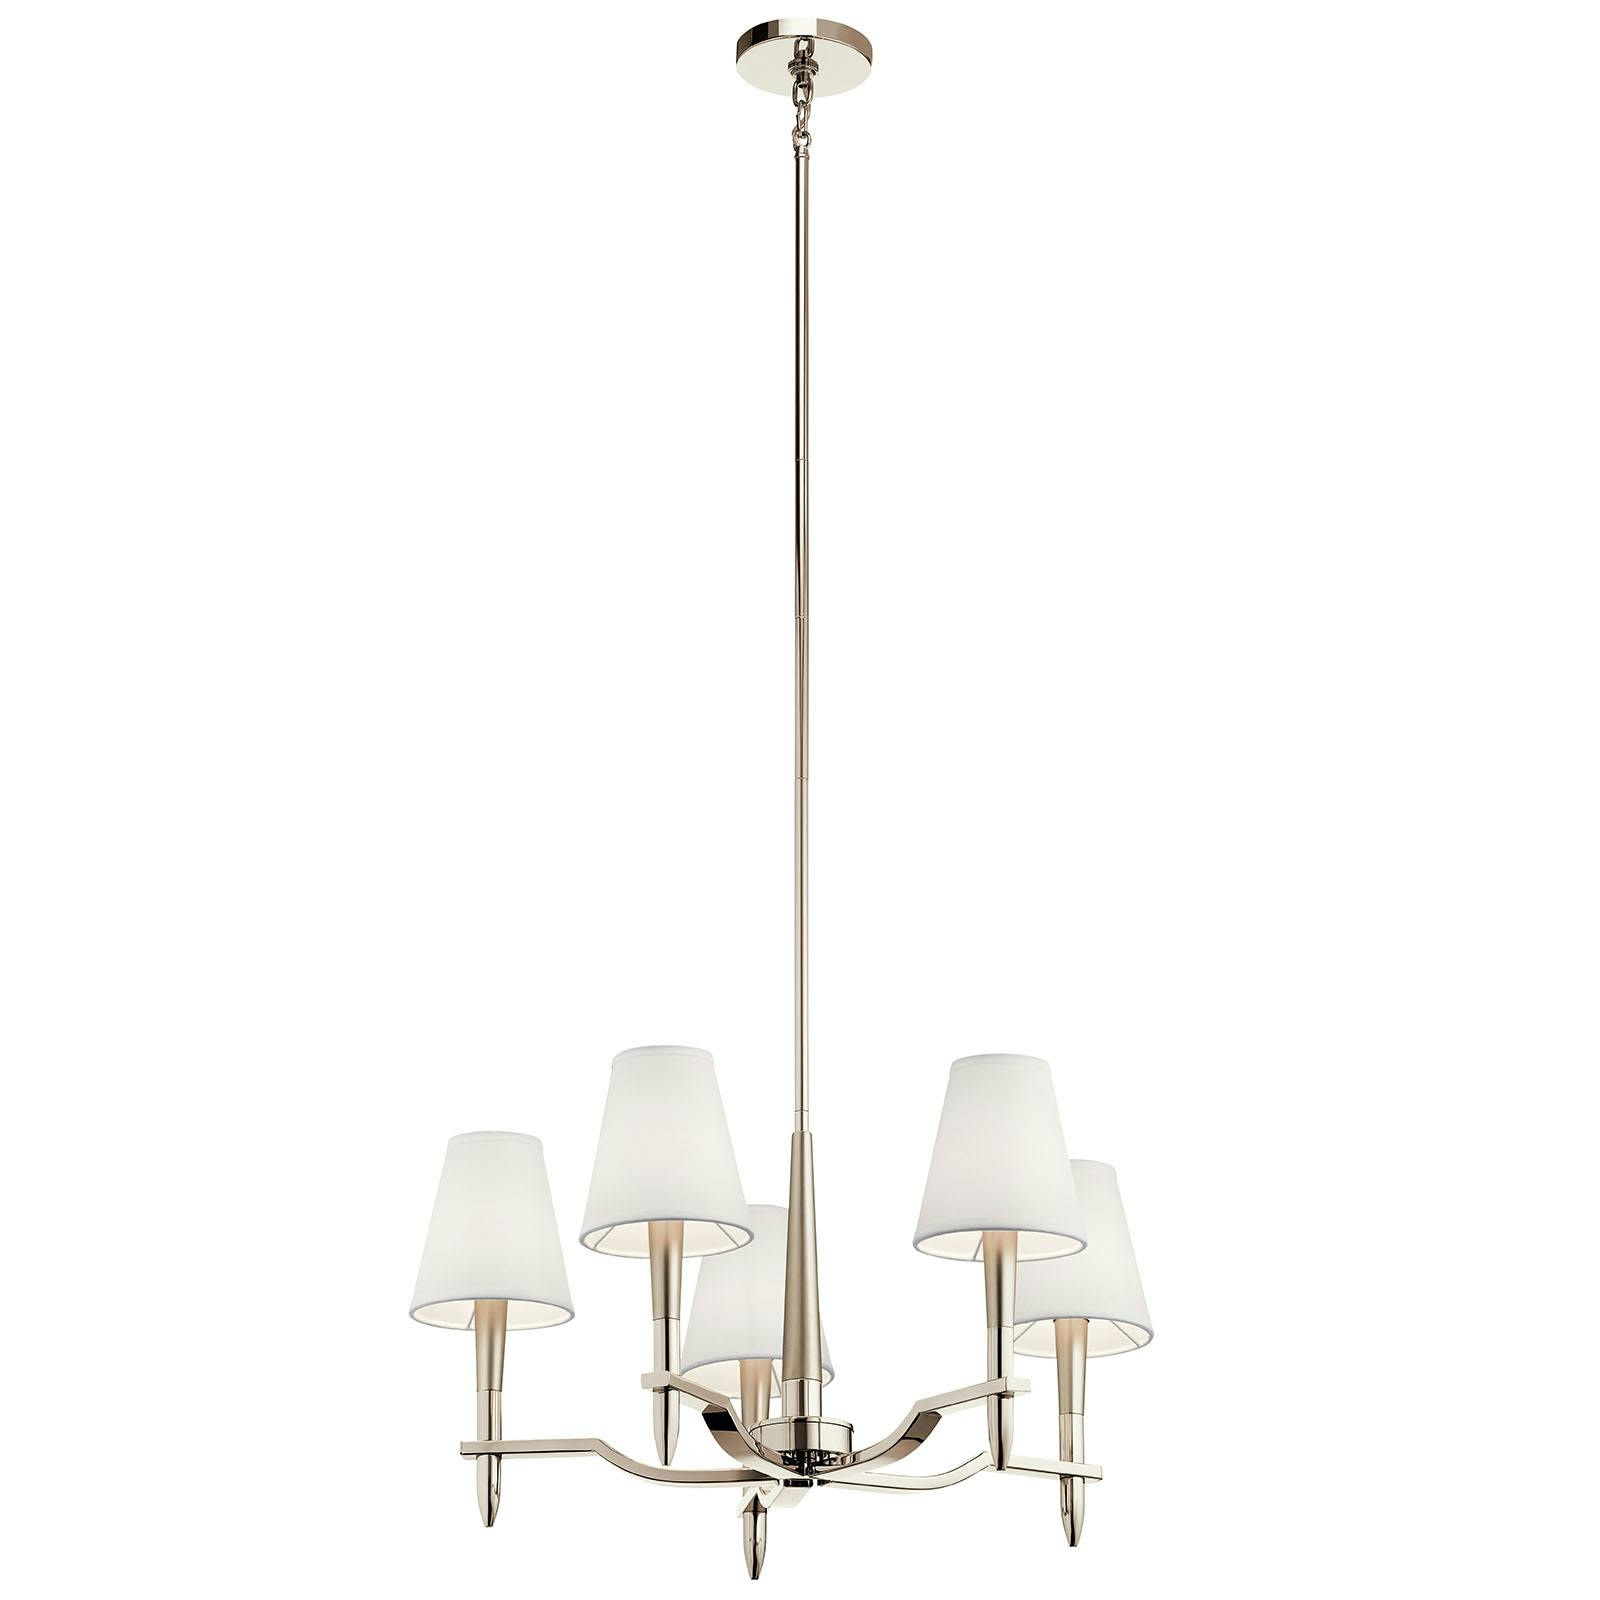 Kinsey 5 Light Chandelier Polished Nickel on a white background